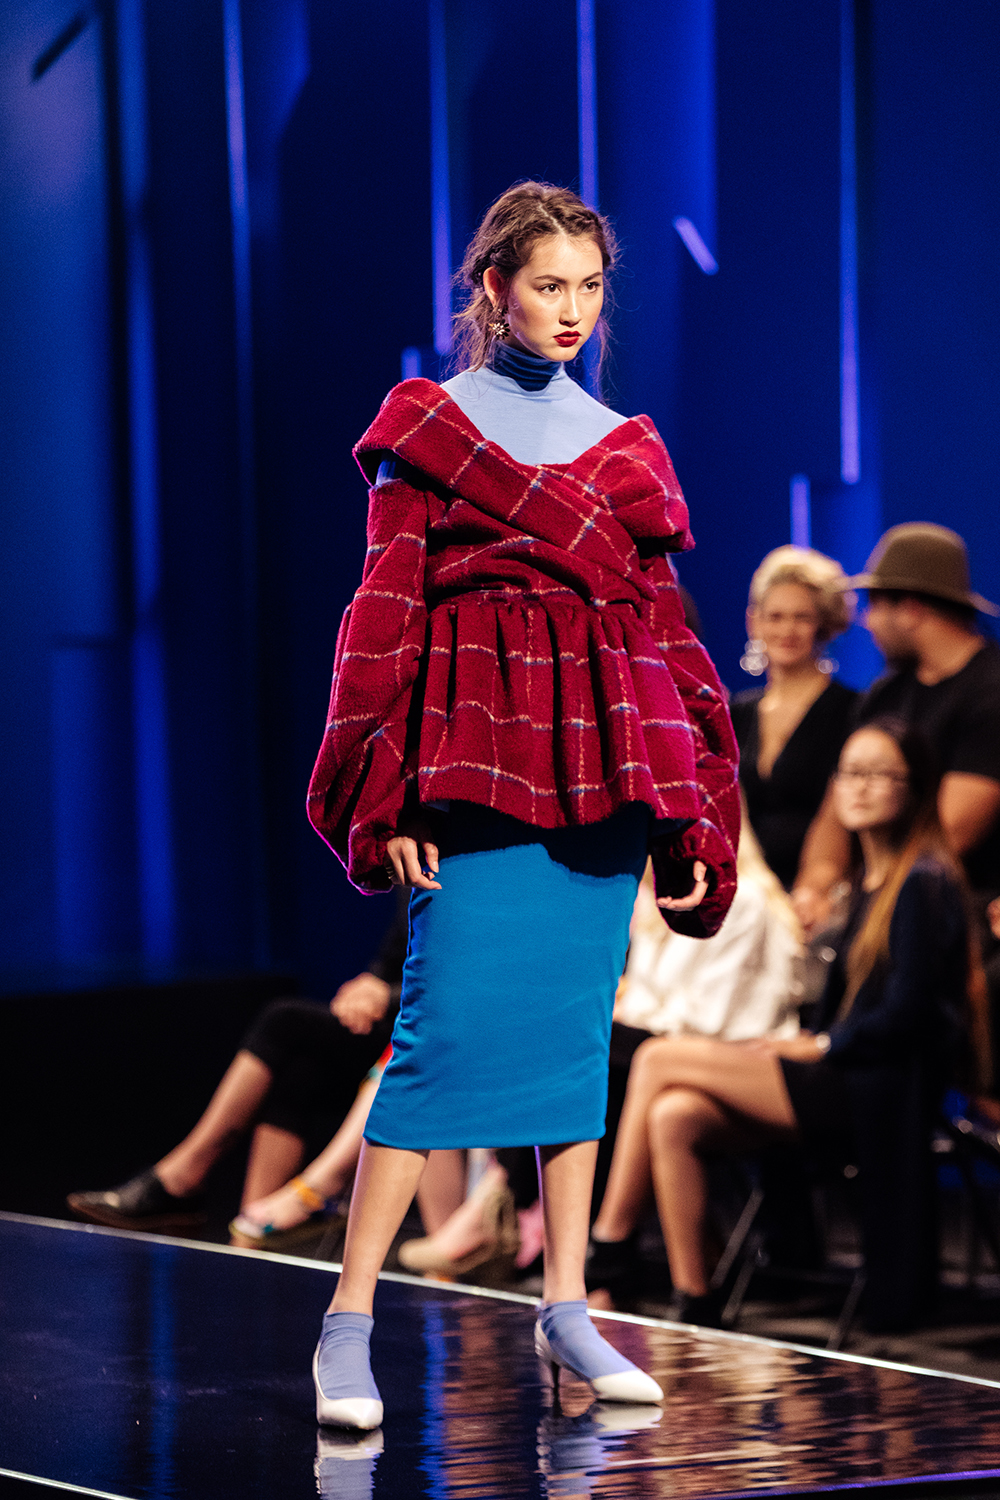 Jess Resene wallpaper: A carpet bag upholstery floral. Design: a cornflour blue merino turtleneck with matching crew sock, dark blue pencil skirt just over the knee in length and a thick tartan off the shoulder jacket with a full sleeve and gathering through the waist. Jess wanted to evoke a sense of warmth and cosiness, much like her wallpaper. Judges comments: